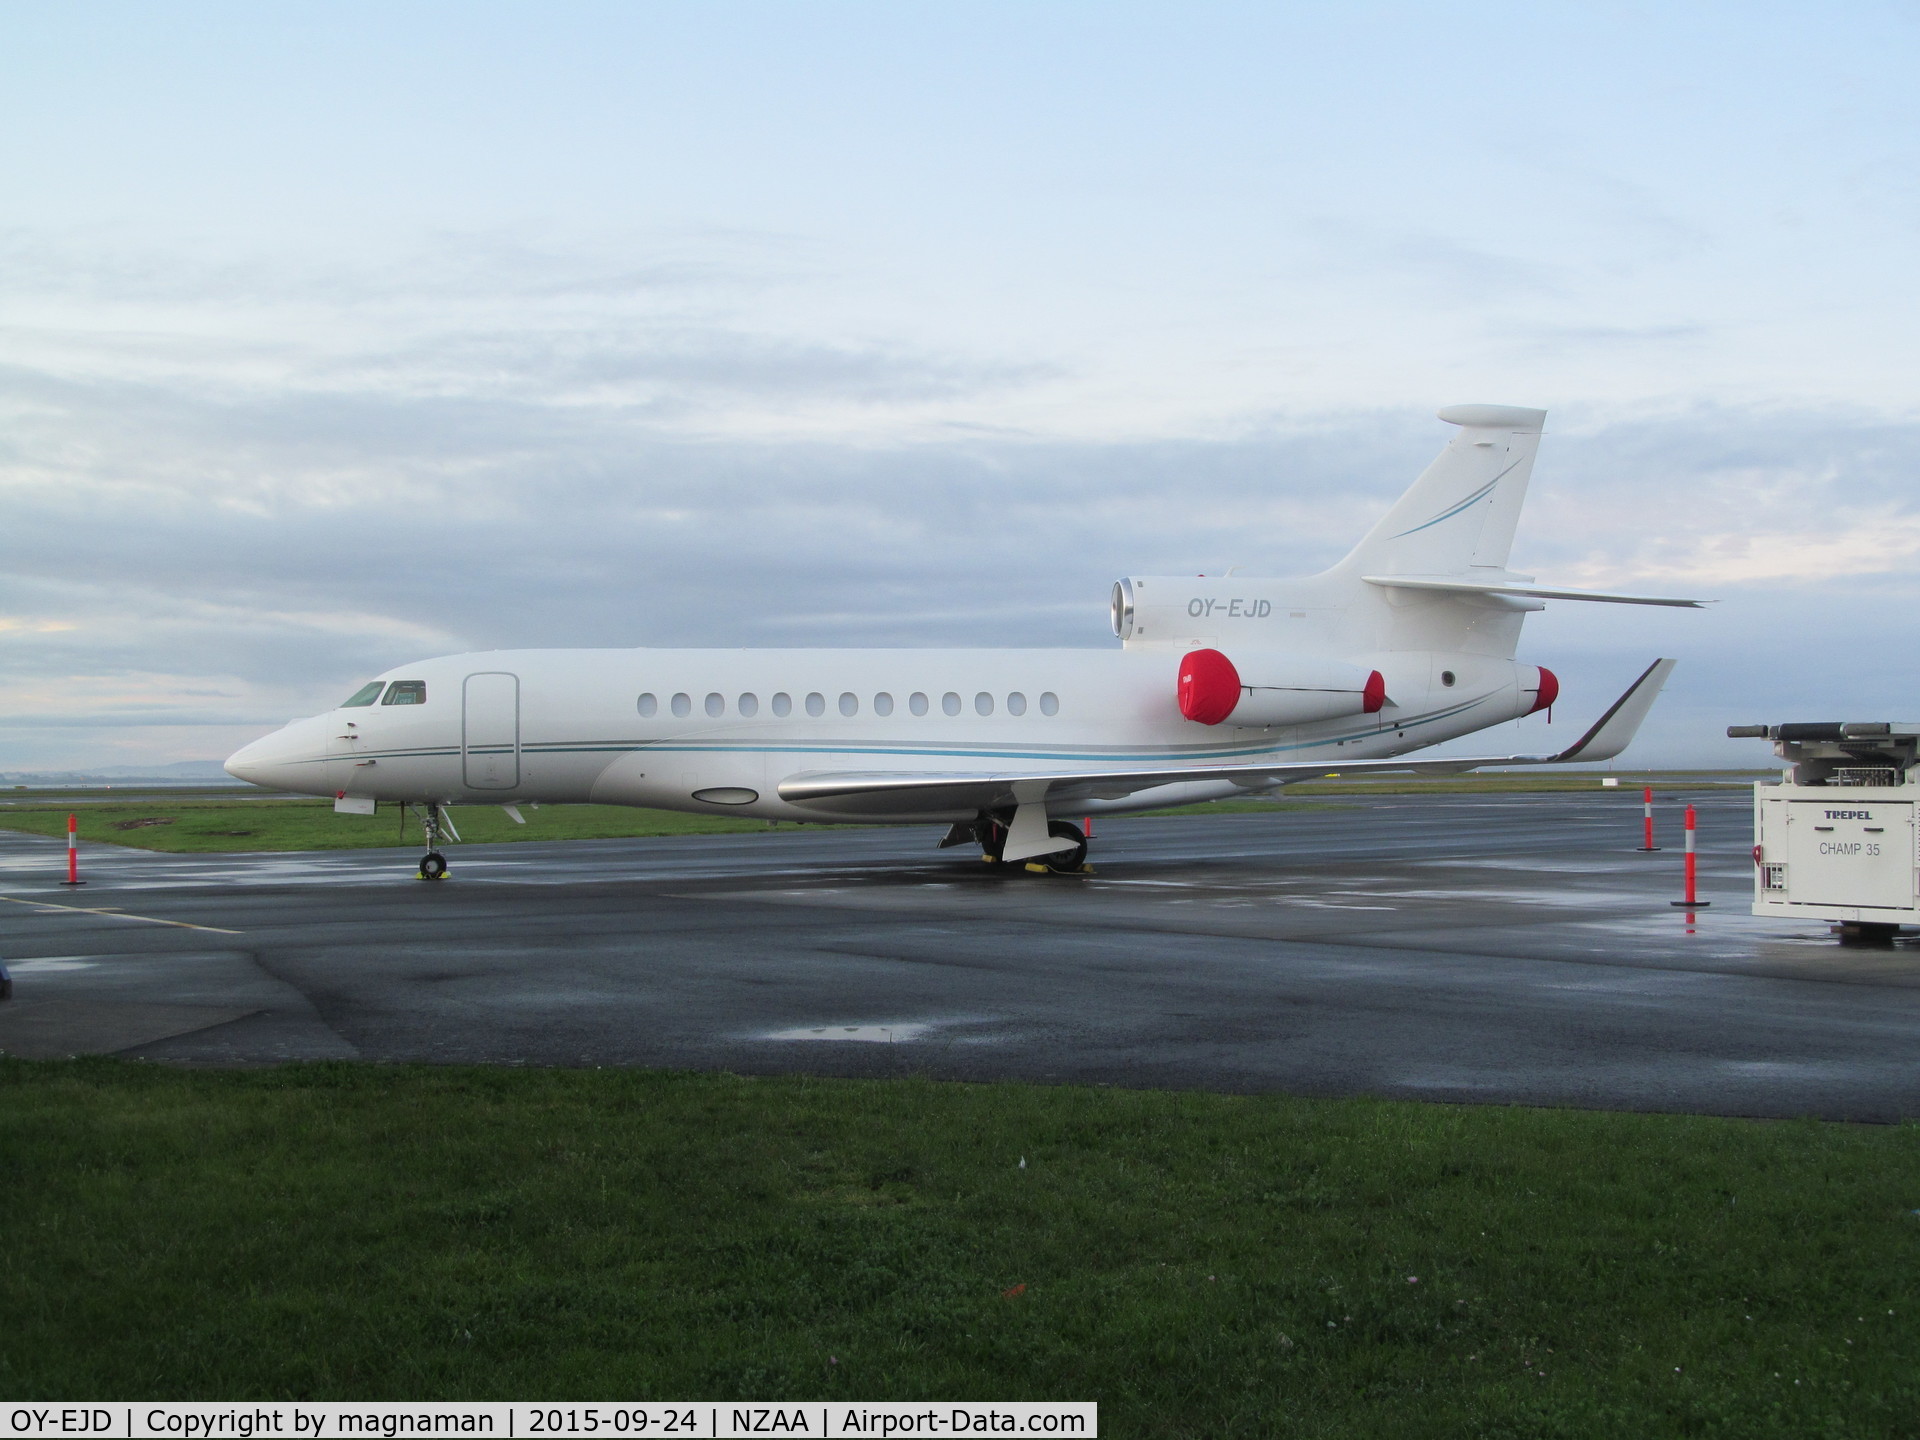 OY-EJD, 2005 Dassault Falcon 2000EX C/N 63, Up from Christchurch via Tauranga after Asian arrival earlier in week. My first OY- seen in NZ.